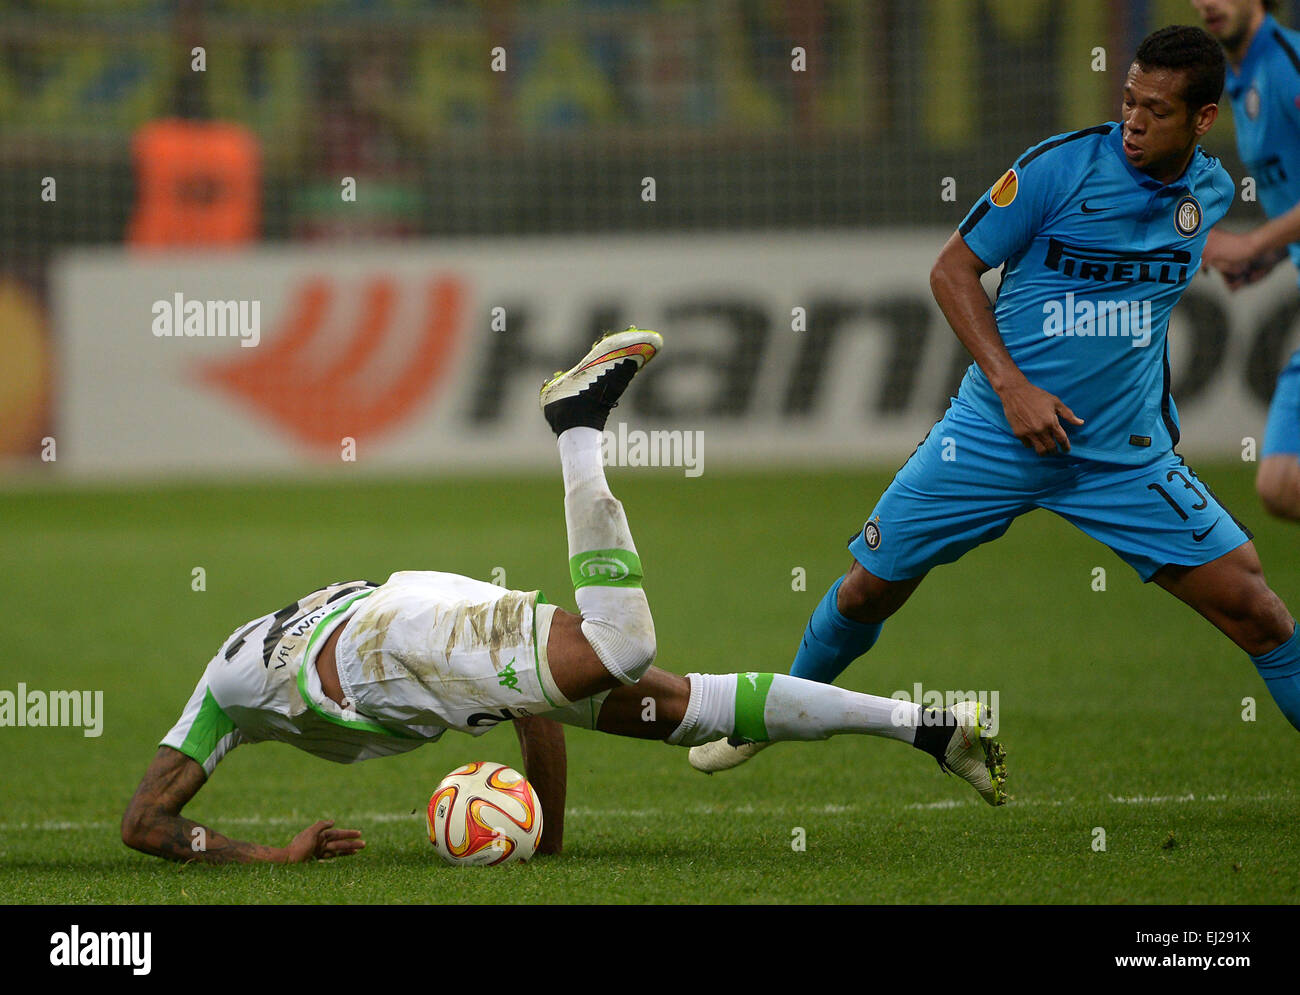 Milan, Italy. 19th Mar, 2015. Wolfsburg's Luiz Gustavo (L) and Inter's Fredy Guarín vie for the ball during the UEFA Europa League round of 16 second leg soccer match between Inter Milan and VfL Wolfsburg at Giuseppe Meazza stadium in Milan, Italy, 19 March 2015. Photo: Peter Steffen/dpa/Alamy Live News Stock Photo